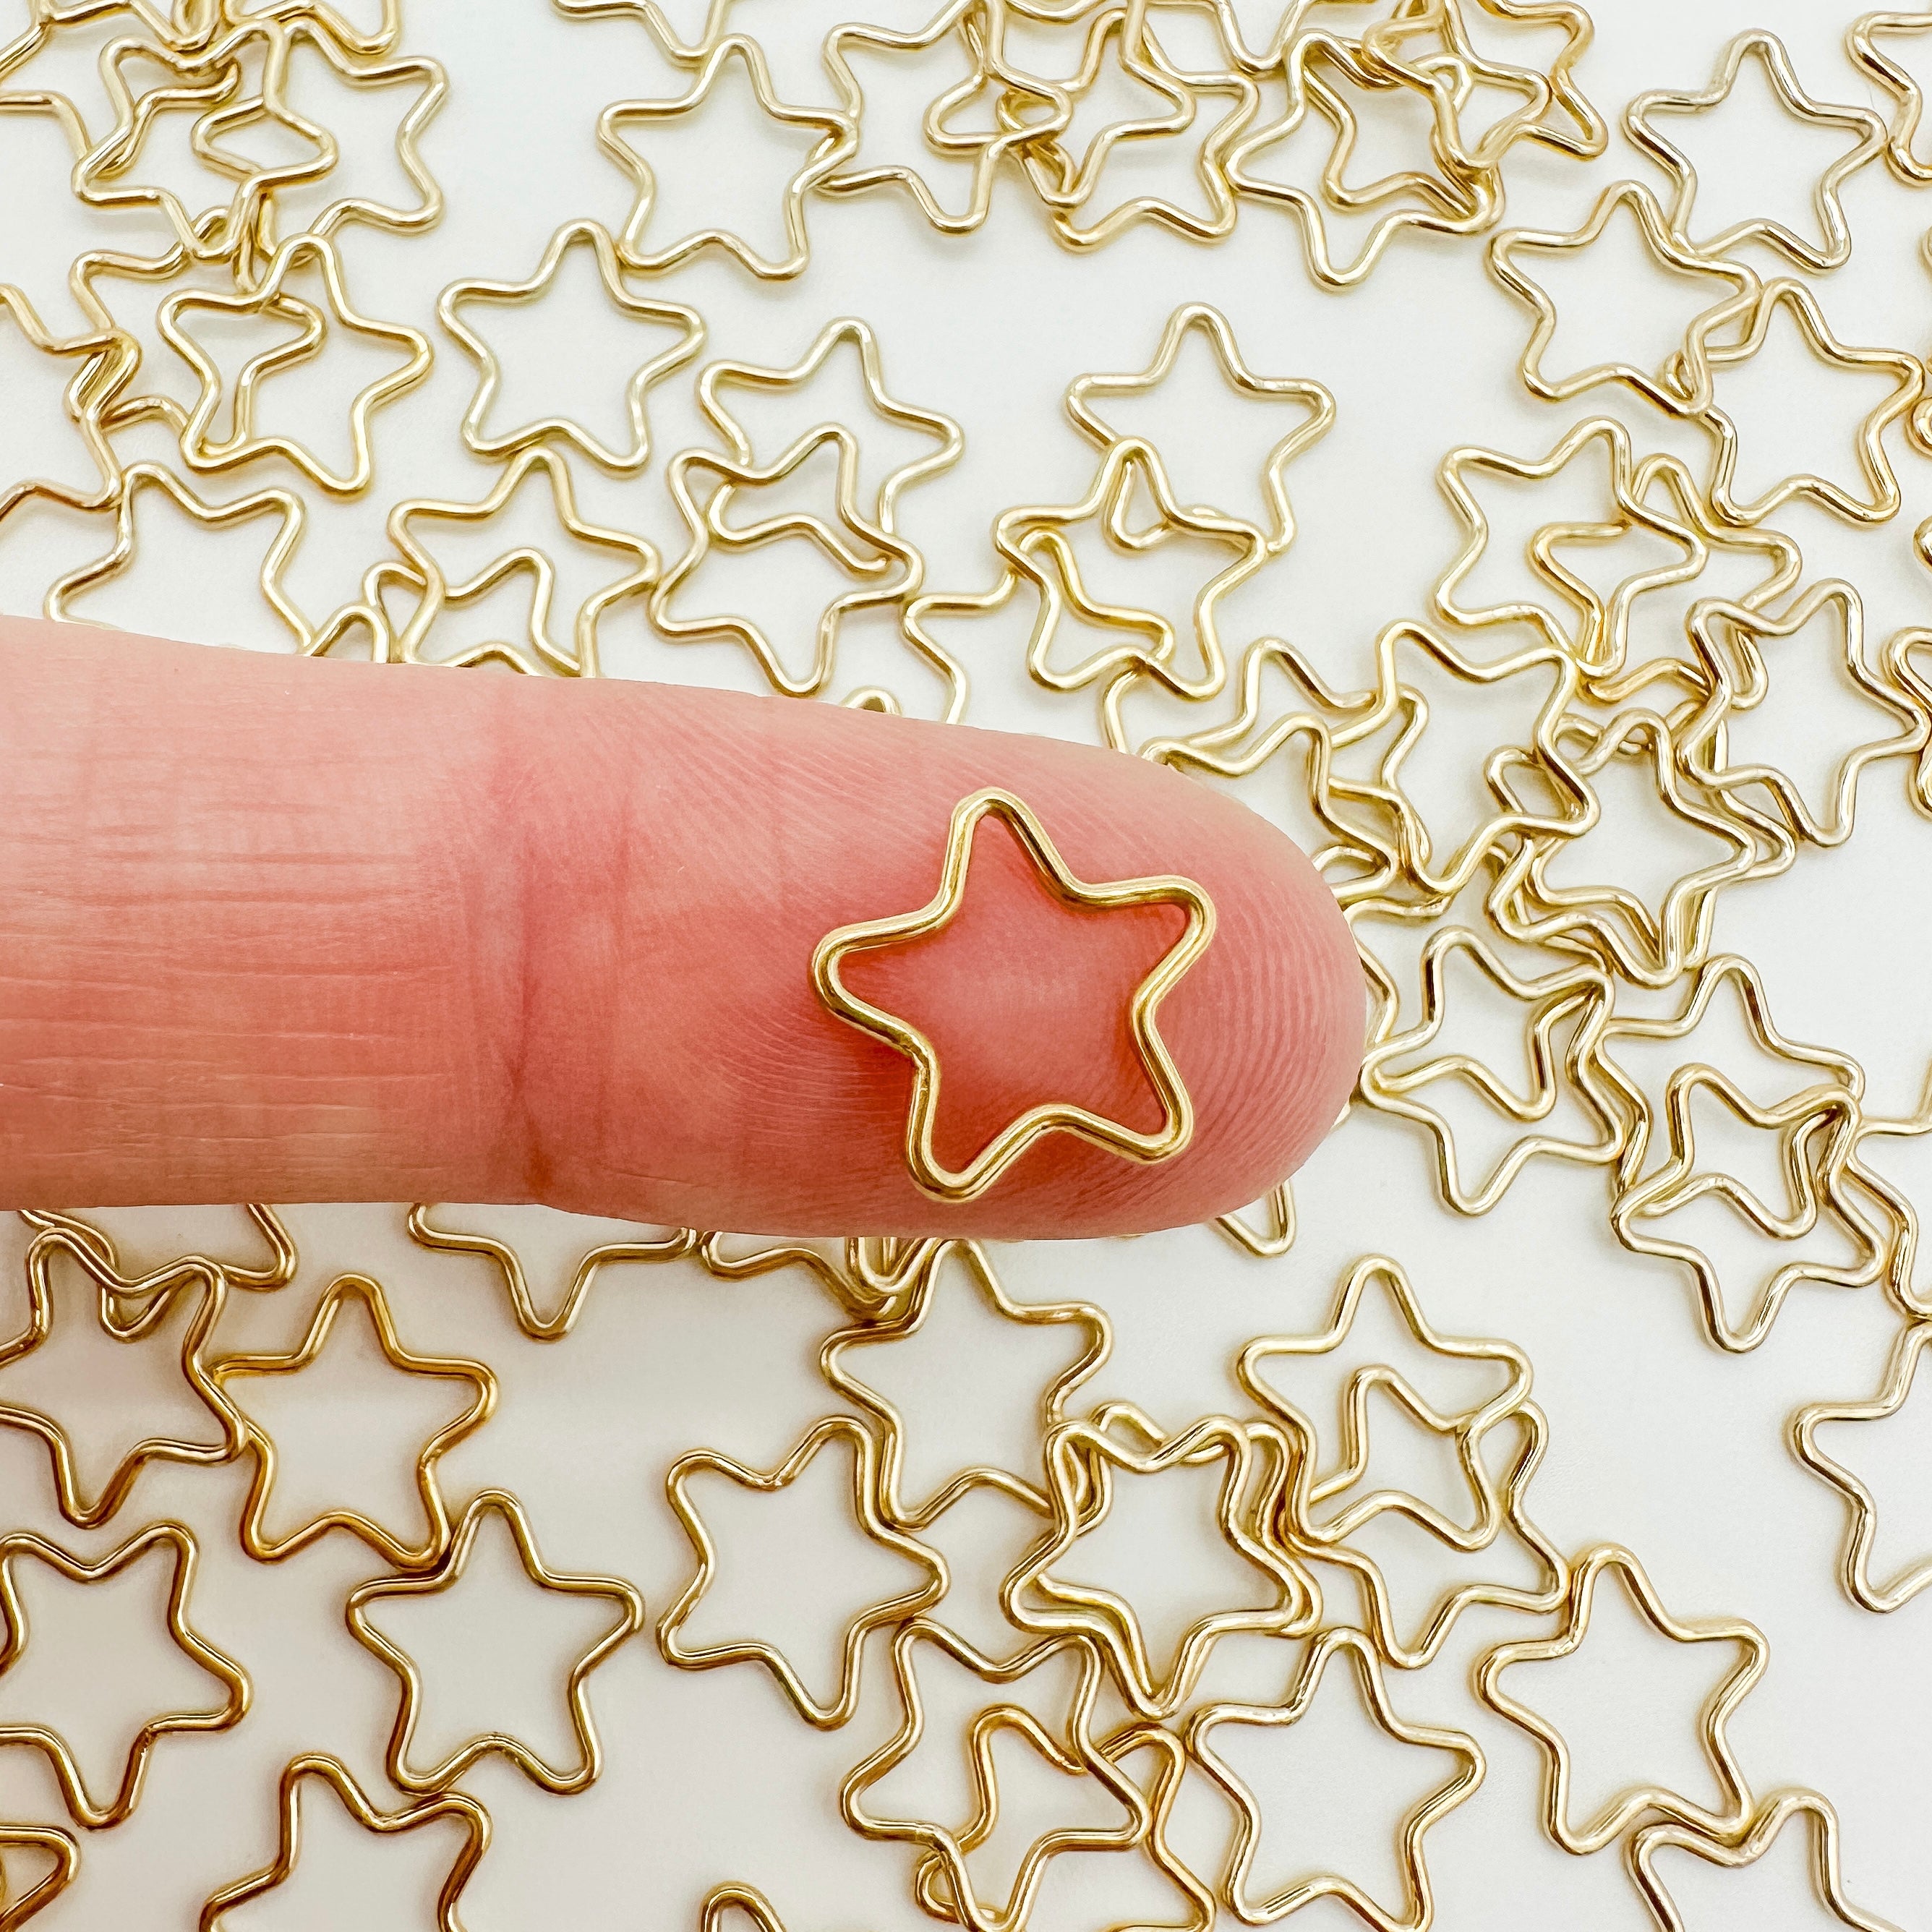 gold filled star connector / gold filled connector / permanent jewelry supplies / permanent jewelry connector / bracelet charm / gold filled connectors